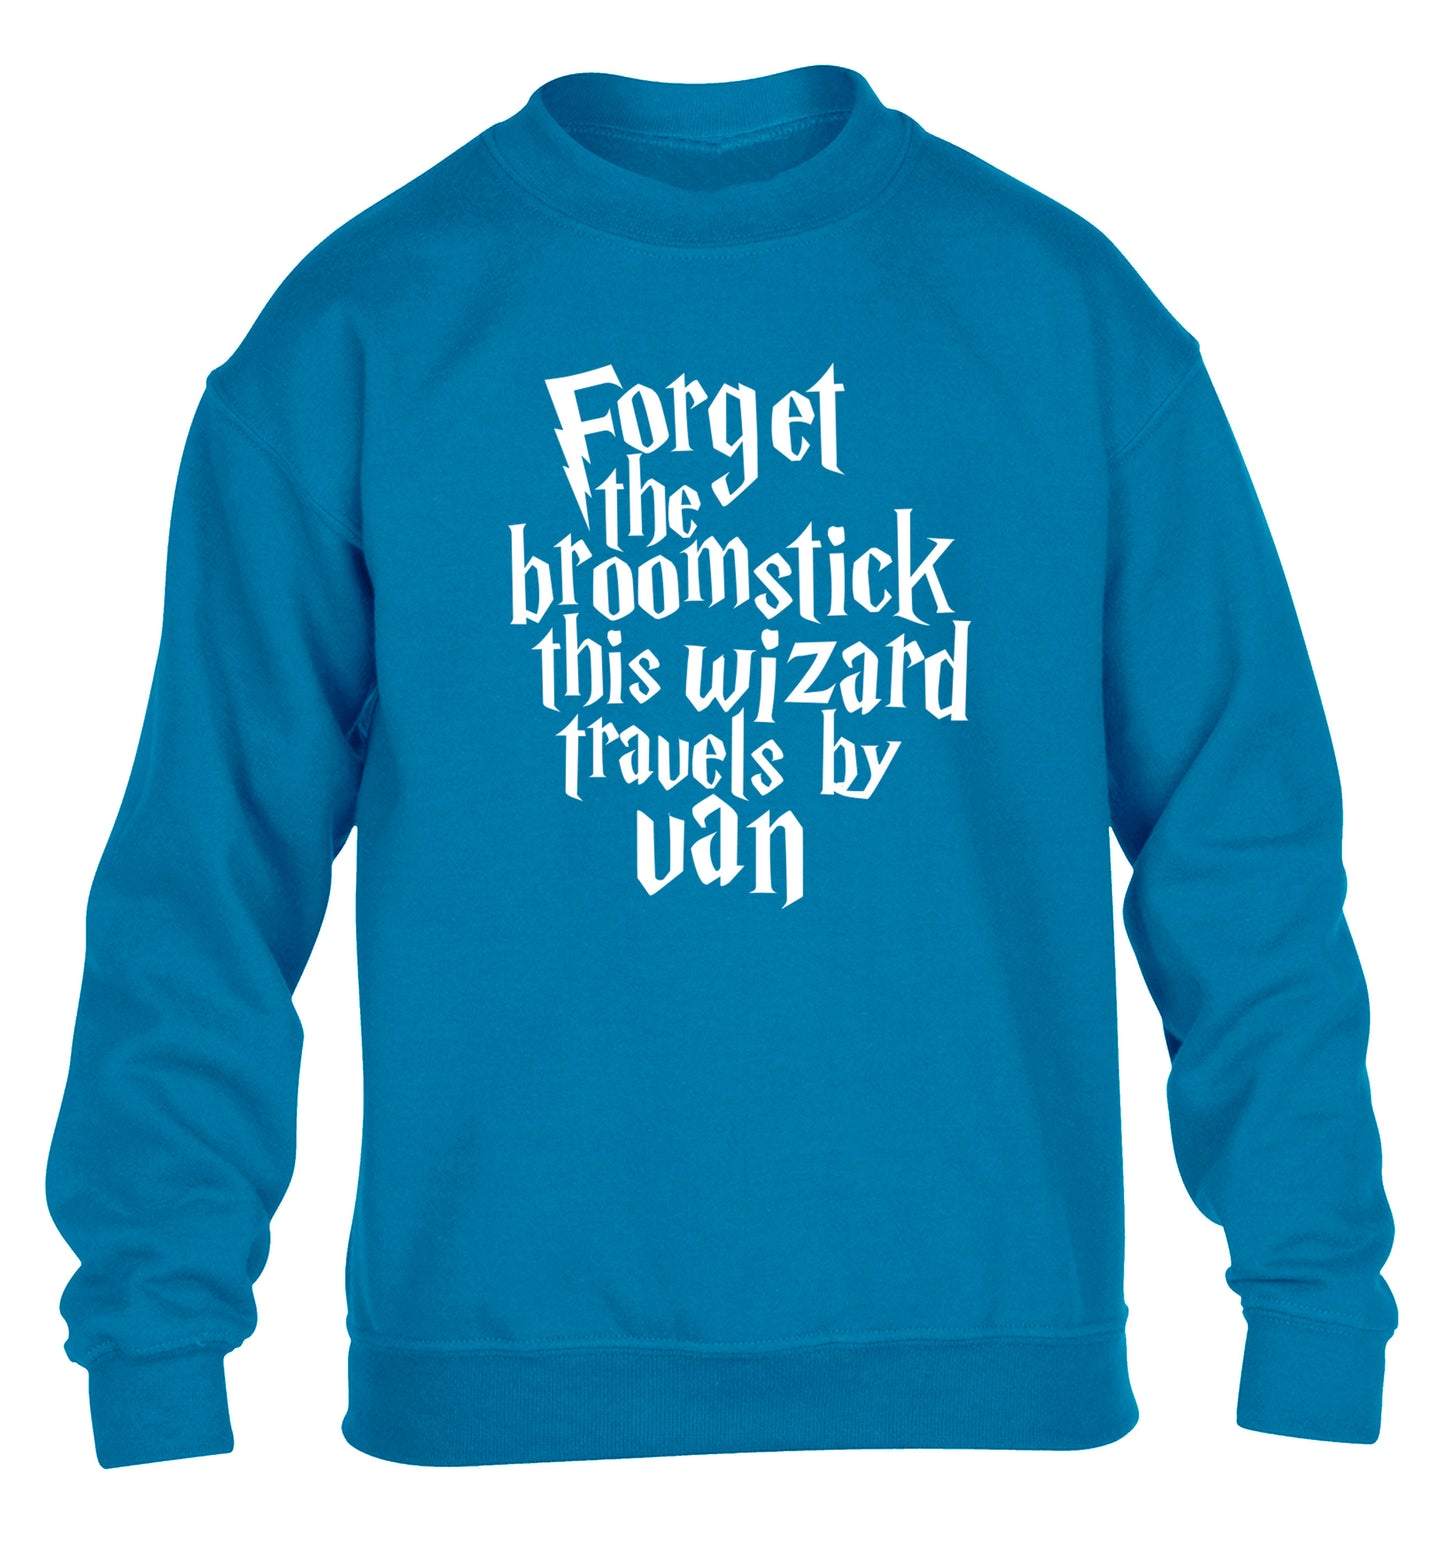 Forget the broomstick this wizard travels by van children's blue sweater 12-14 Years